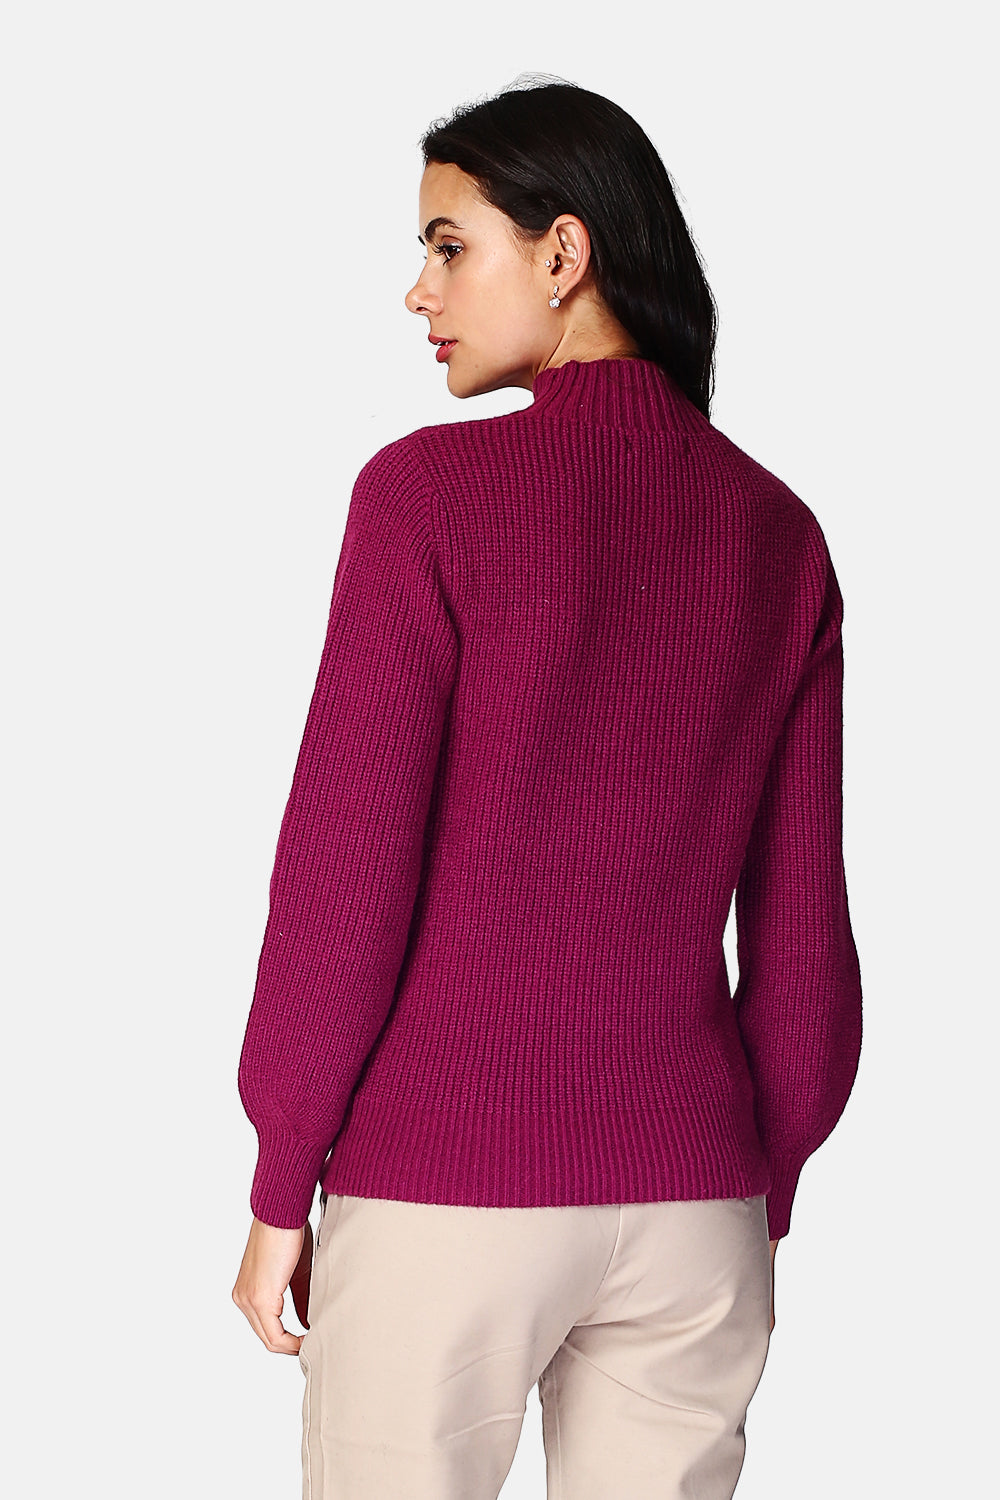 High neck sweater with long sleeves slightly puffy cables in front